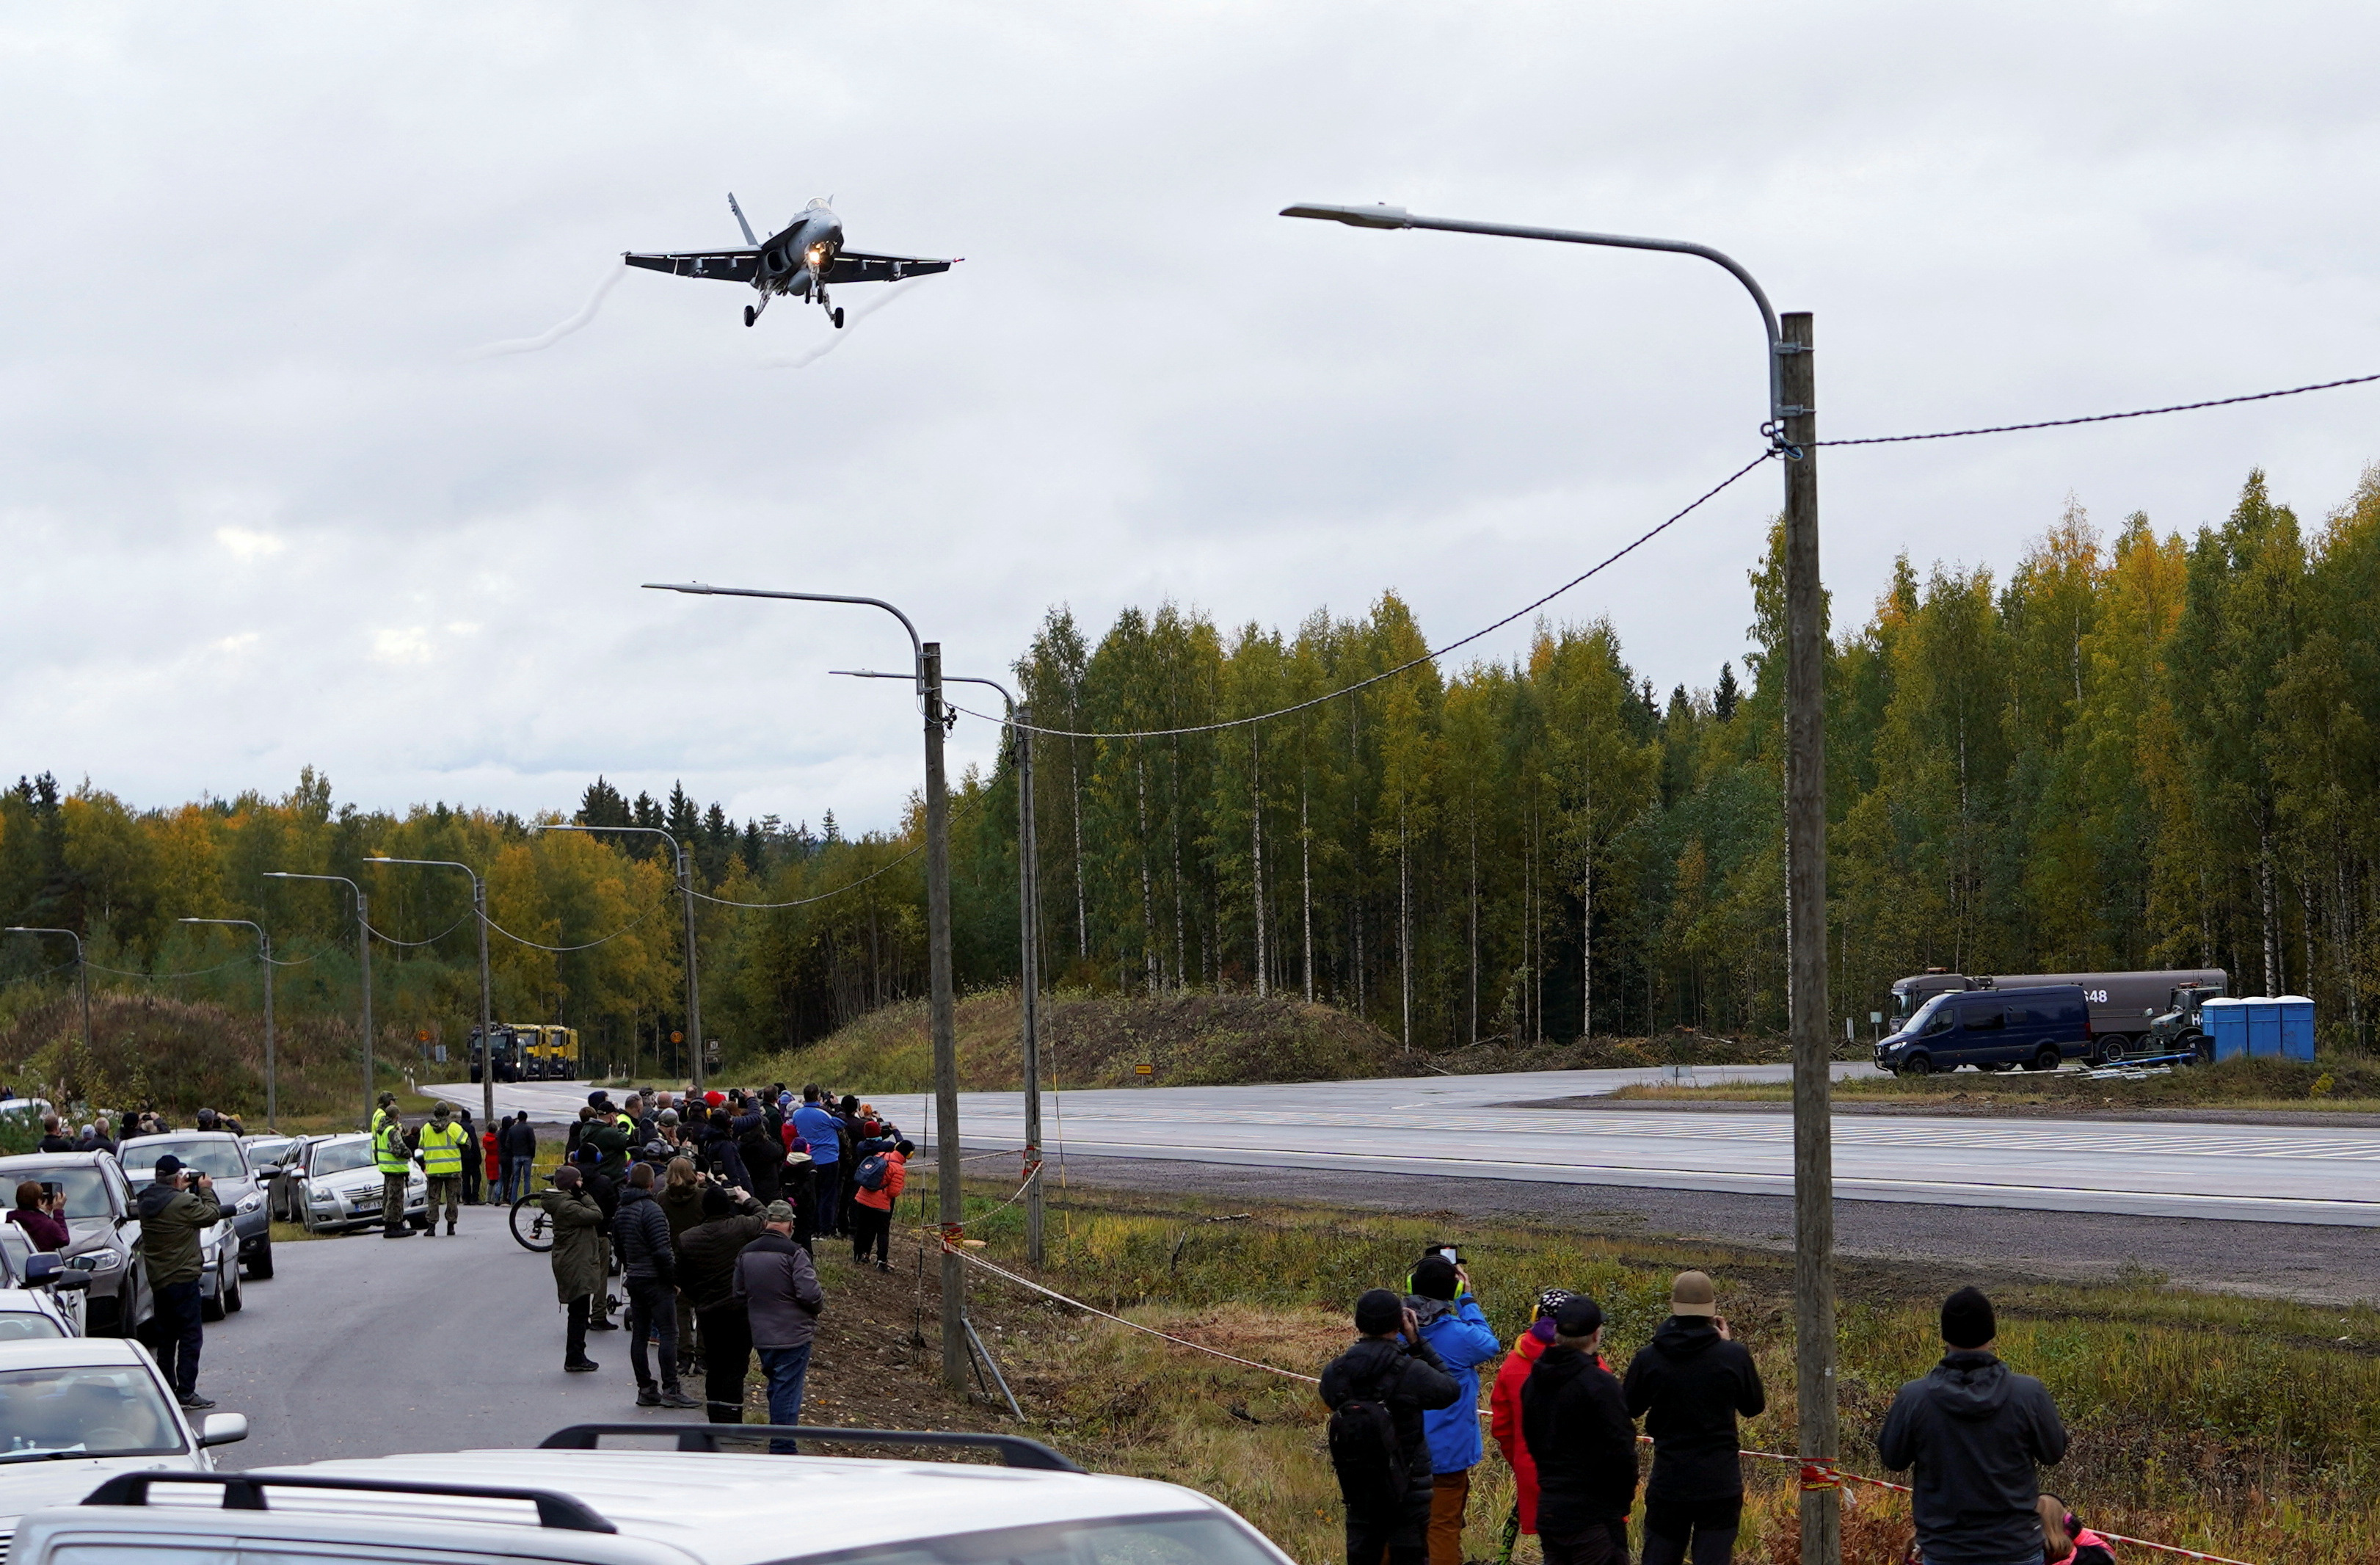 Finland conducts yearly air exercise, lands fighter jets on highway